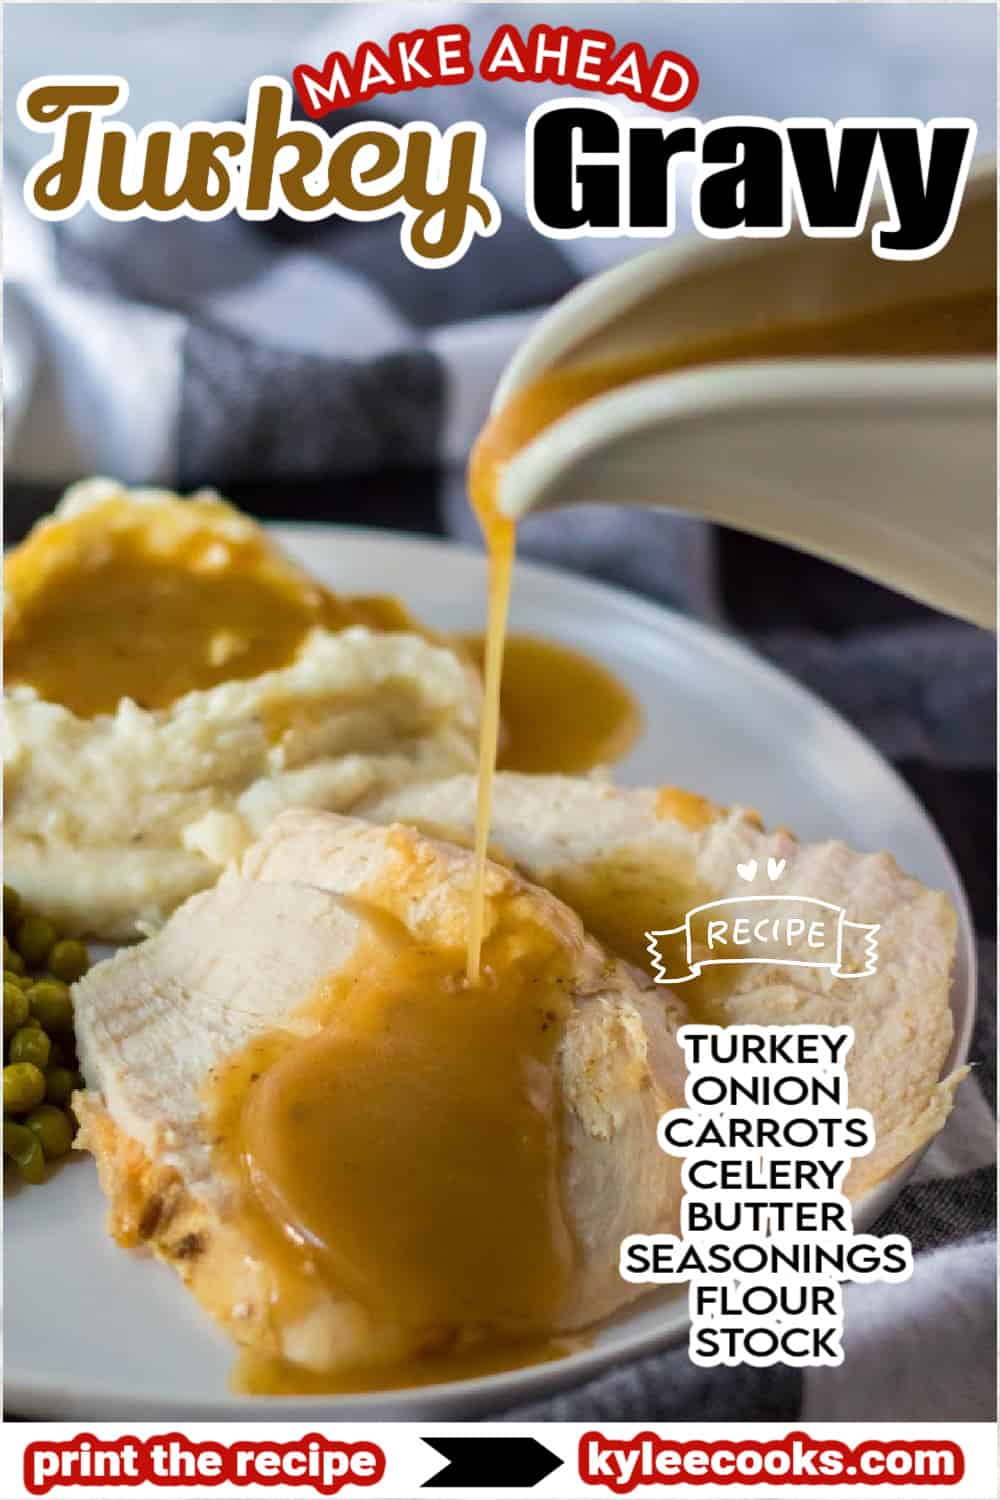 gravy being poured over turkey with text overlaid.